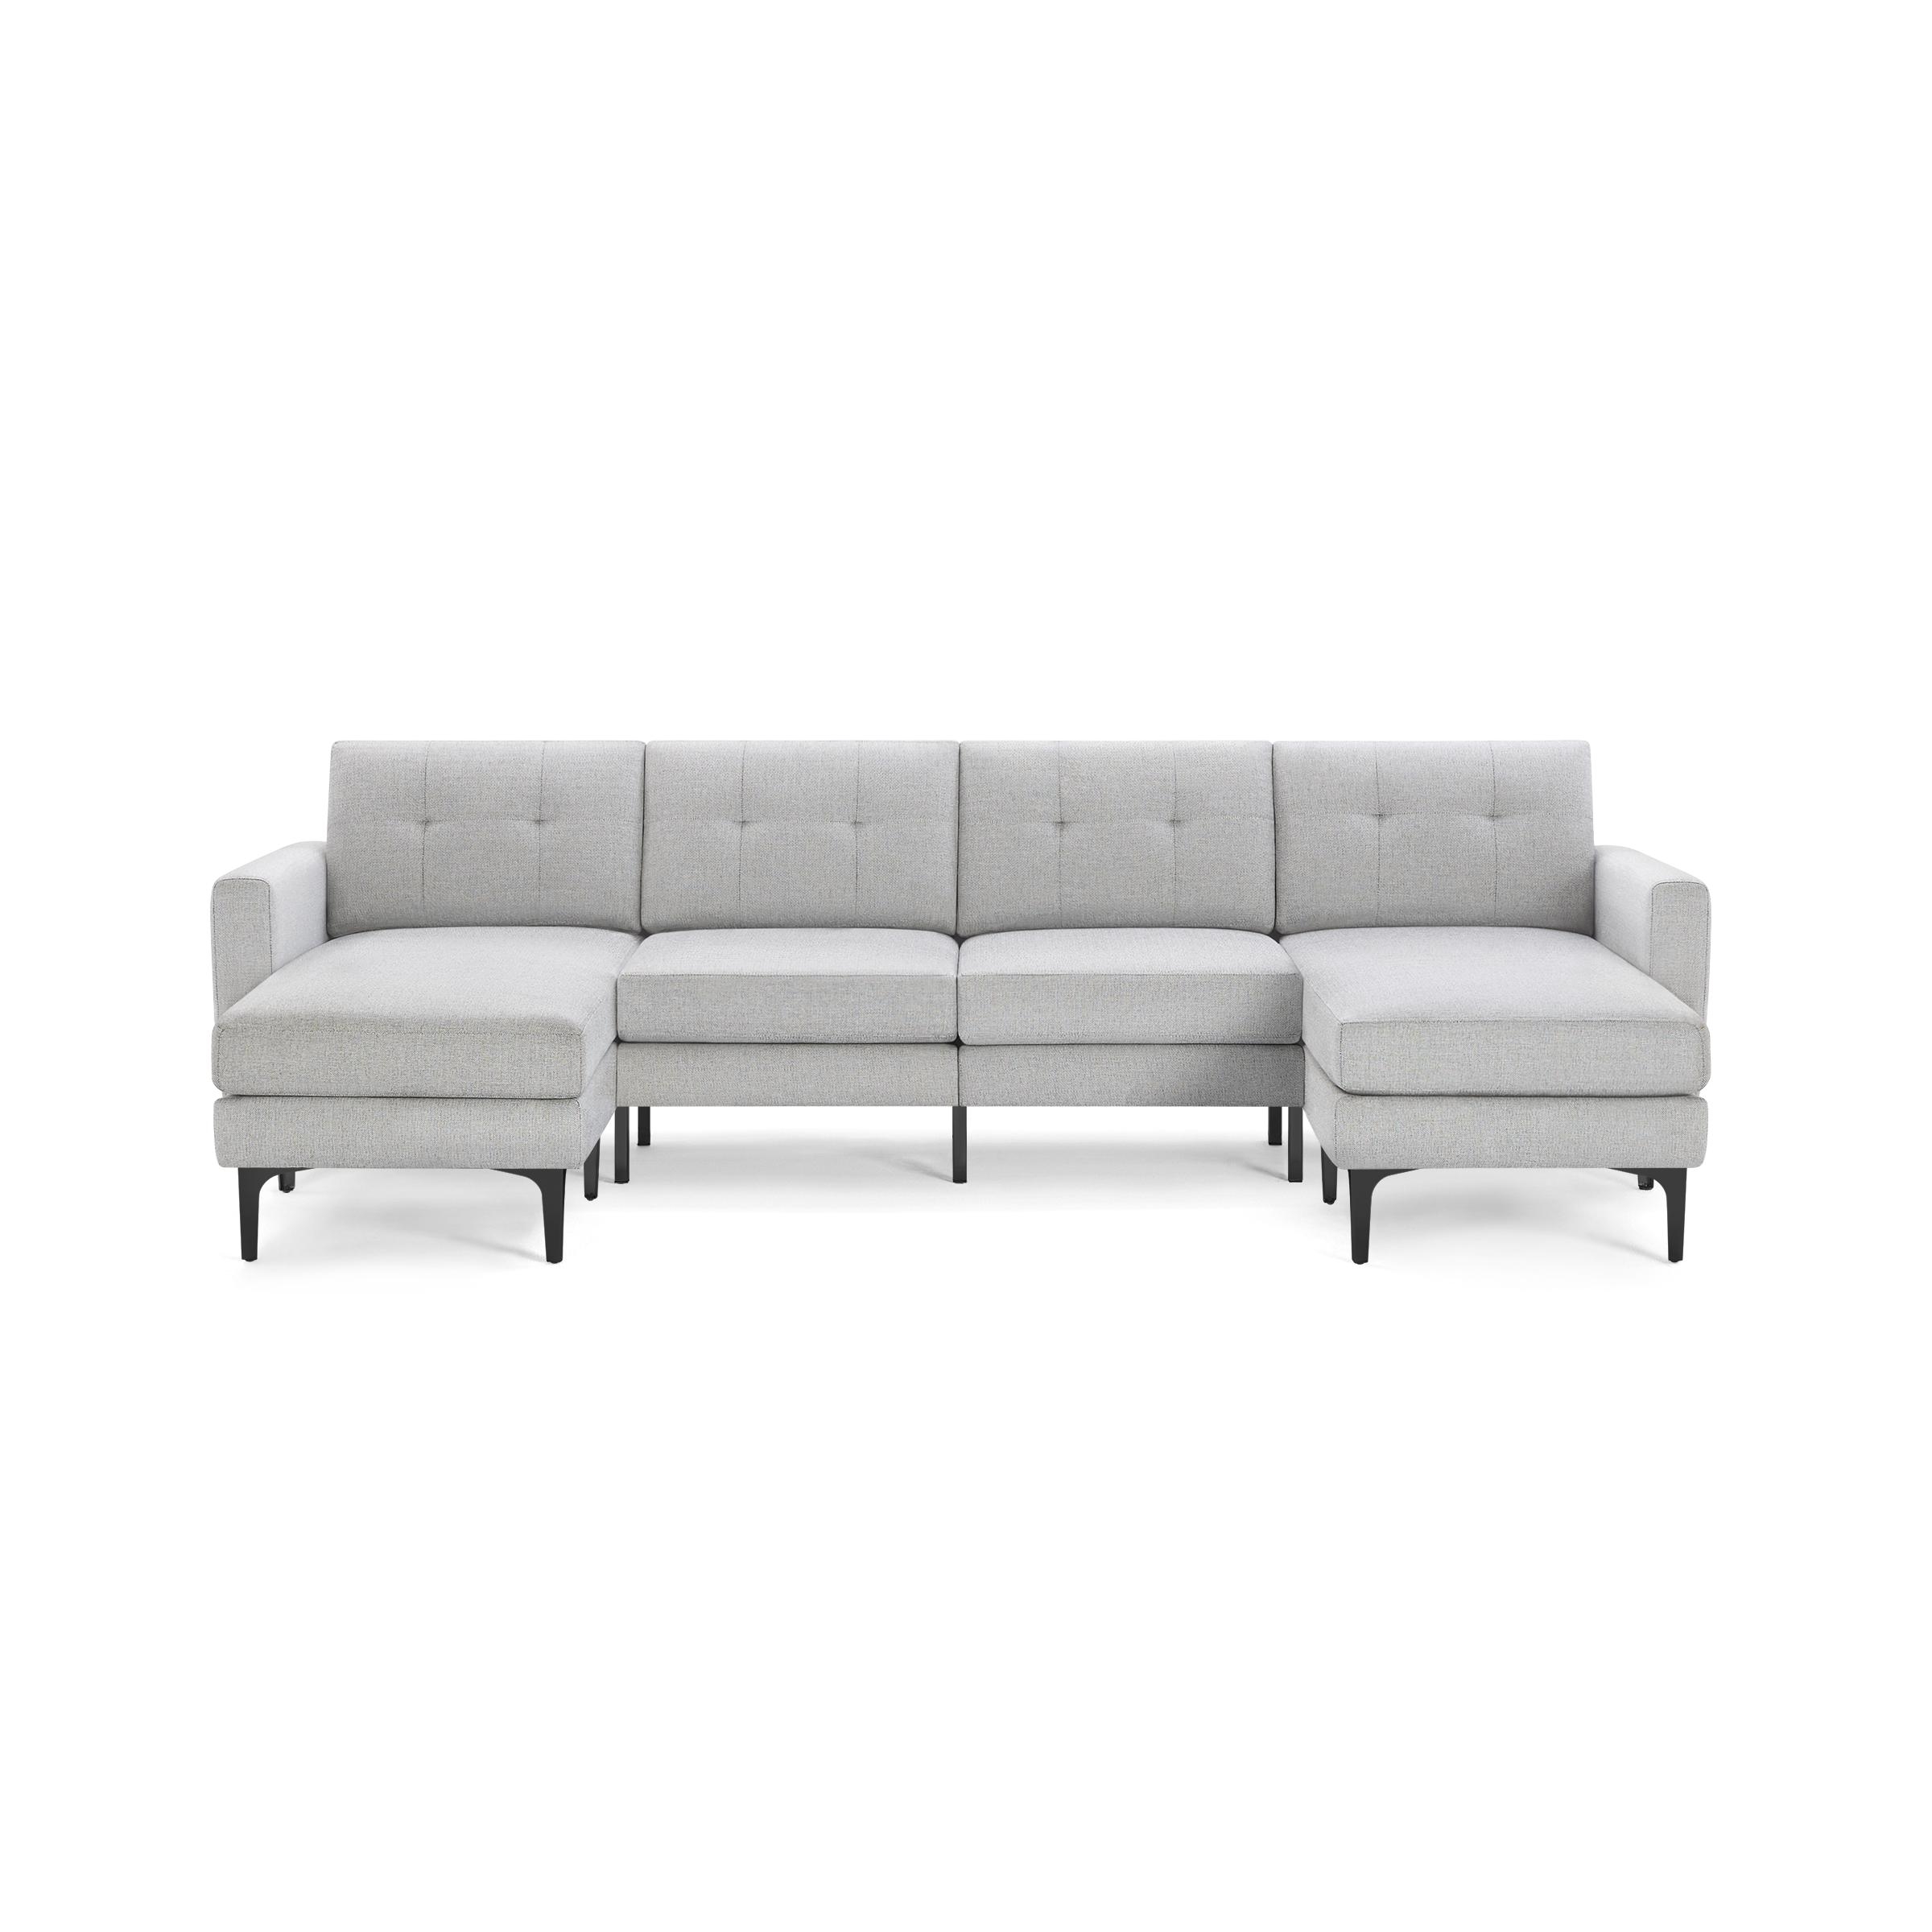 Nomad Double Chaise Sectional in Crushed Gravel - Image 0